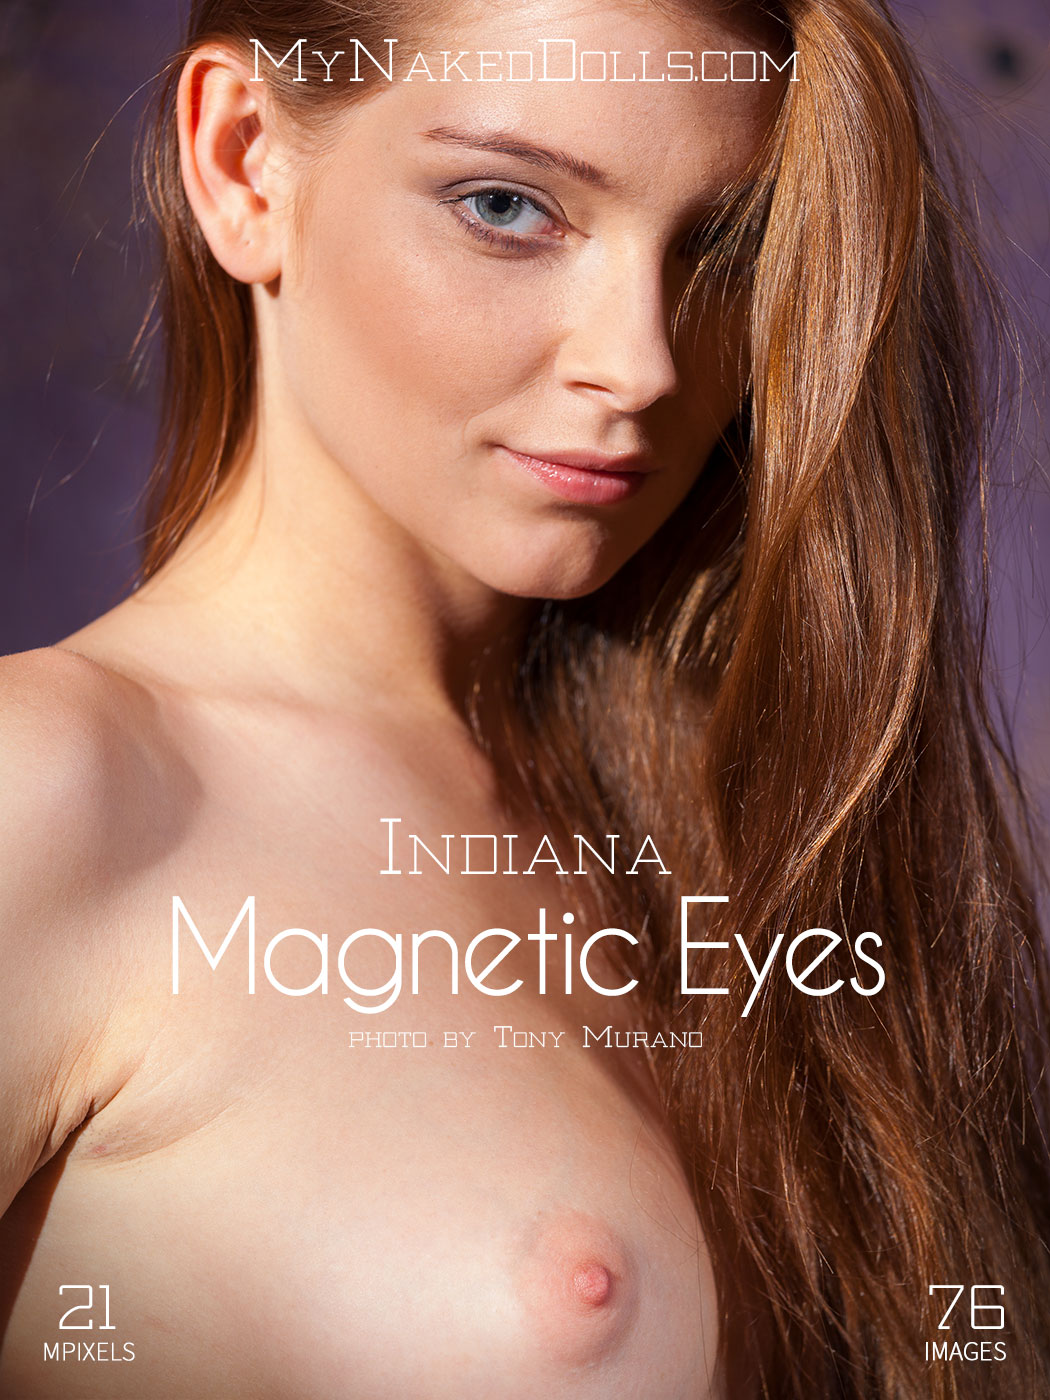 Magnetic-Eyes_Indiana_Cover.jpg (1050×1400)